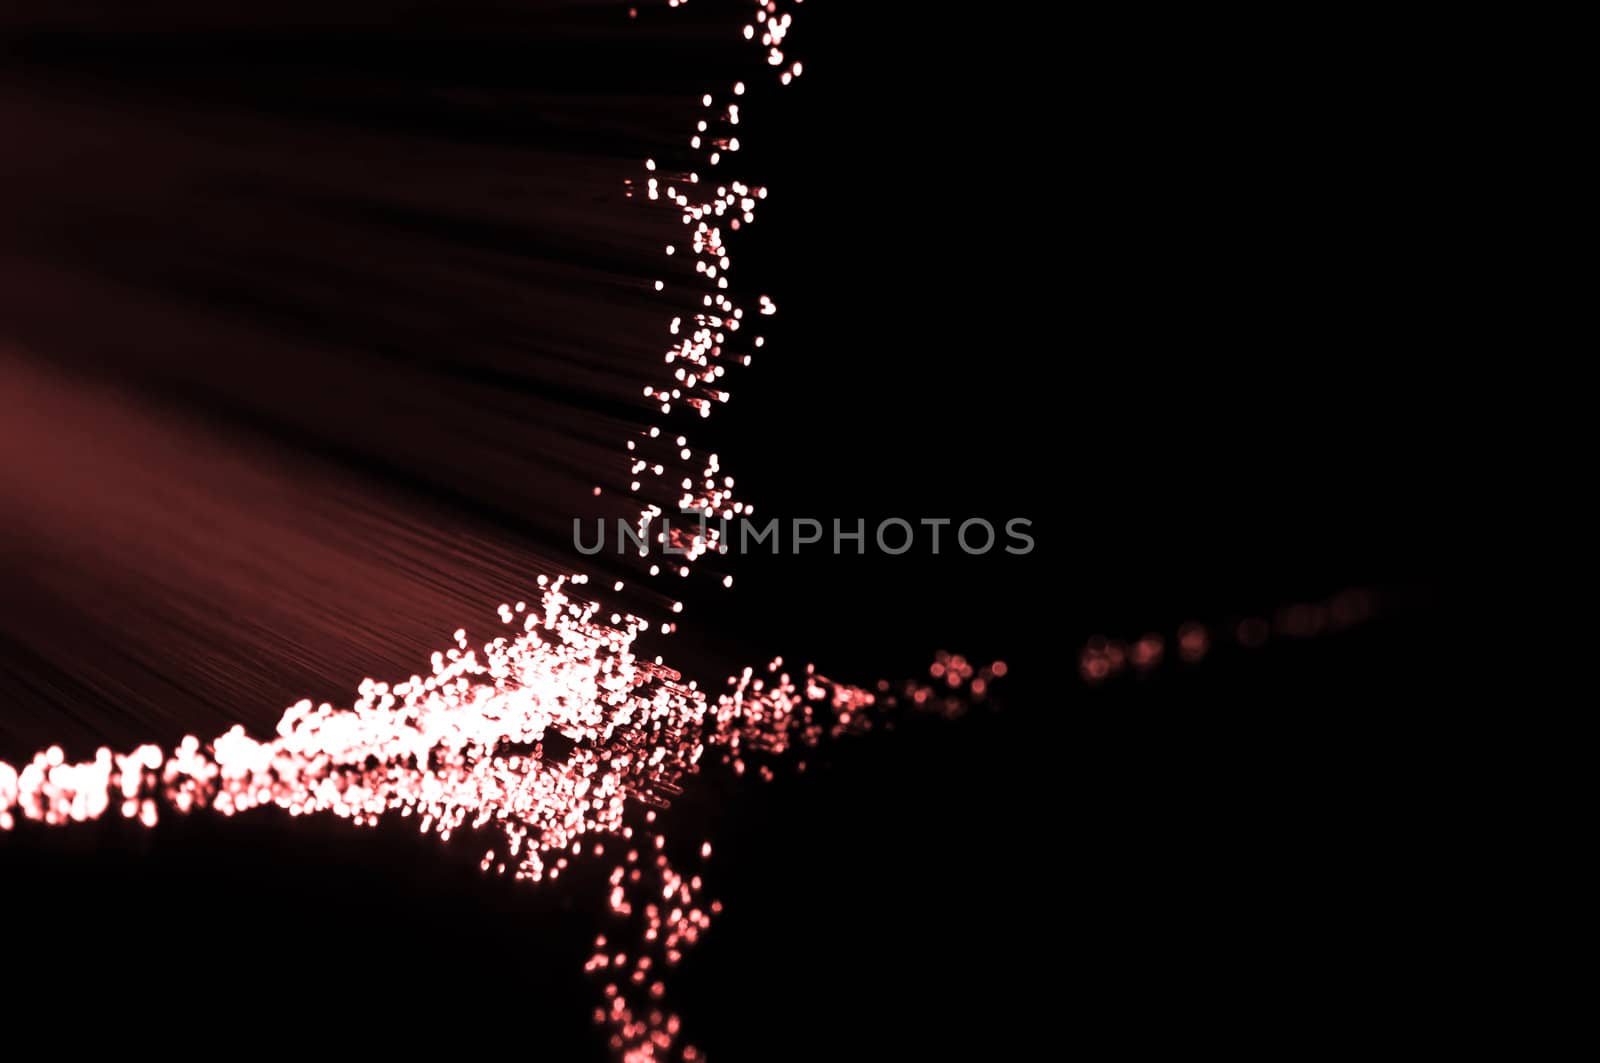 Close up on the ends of red fibre optic light strands reflecting on black.